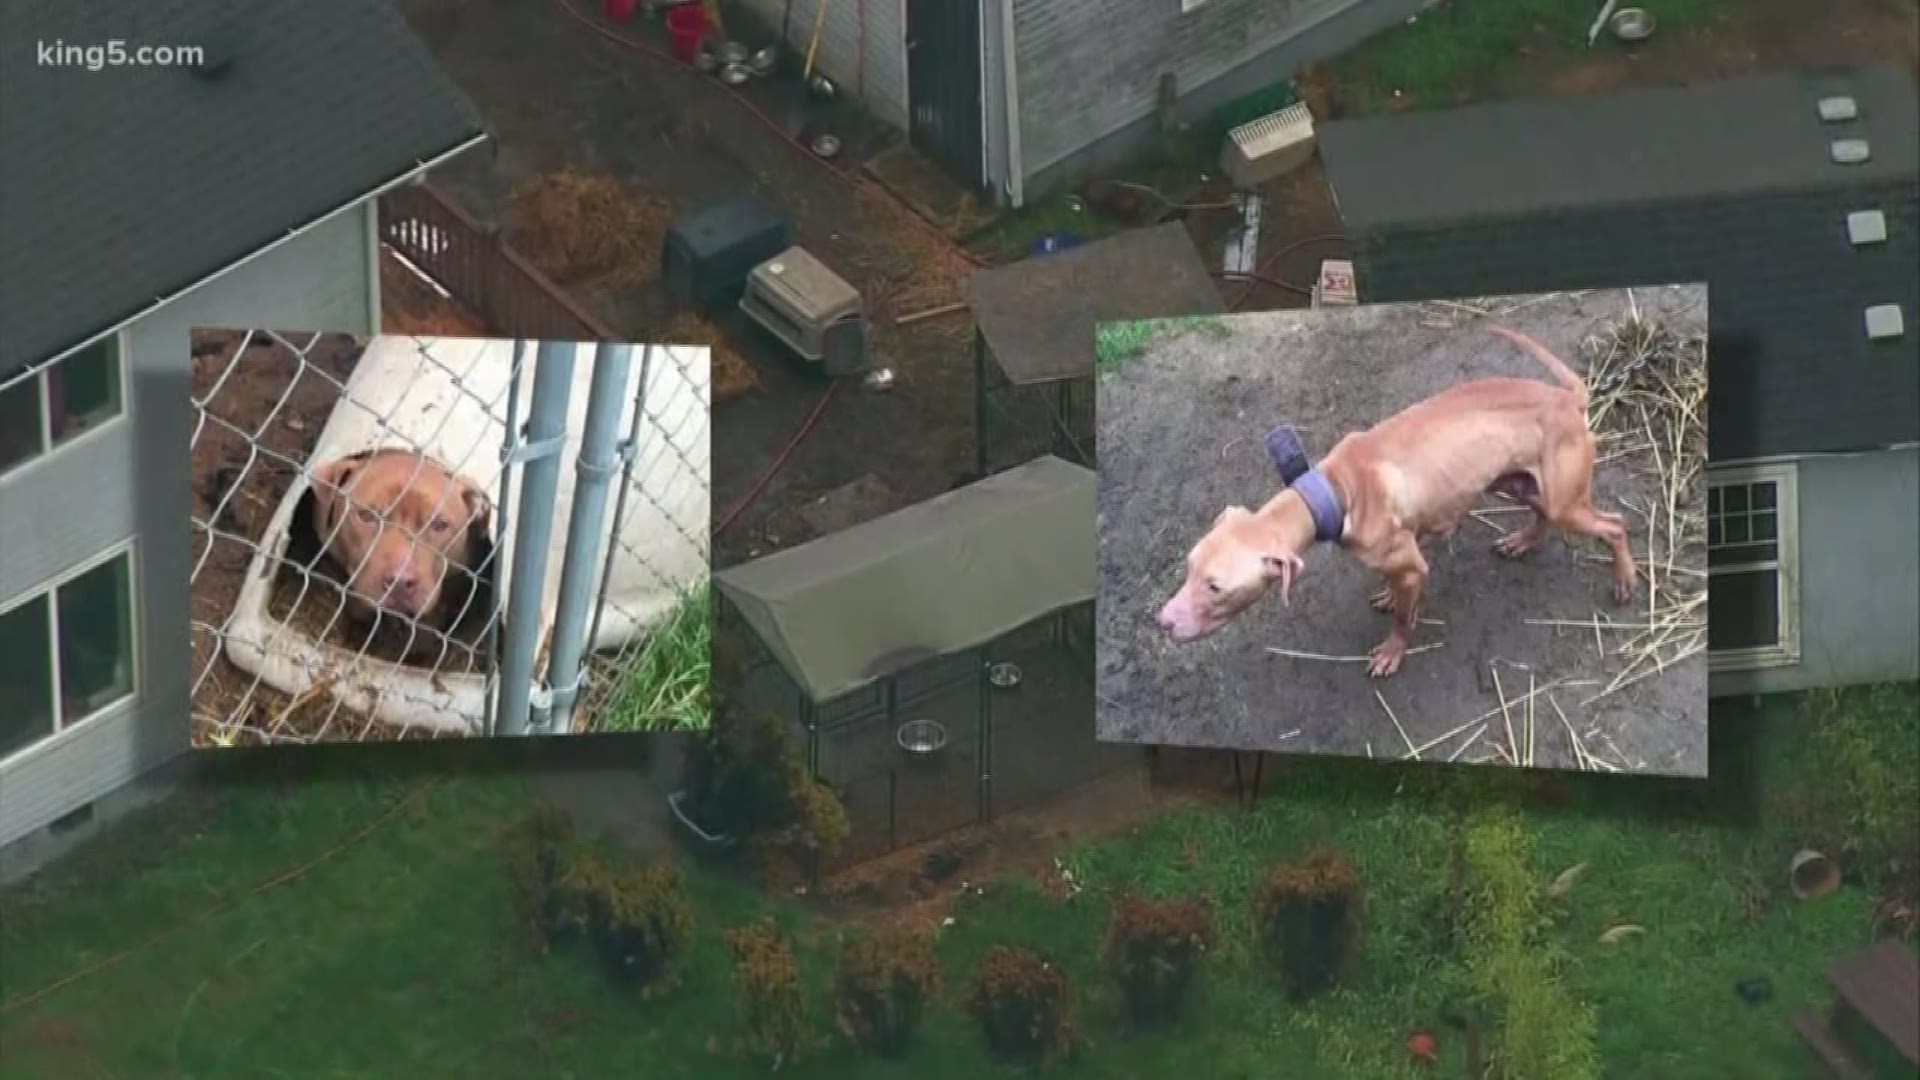 Nearly 50 dogs were rescued from a suspected dog-fighting operation in Tacoma. A 40-year-old man was booked into the Pierce County jail on animal cruelty charges.